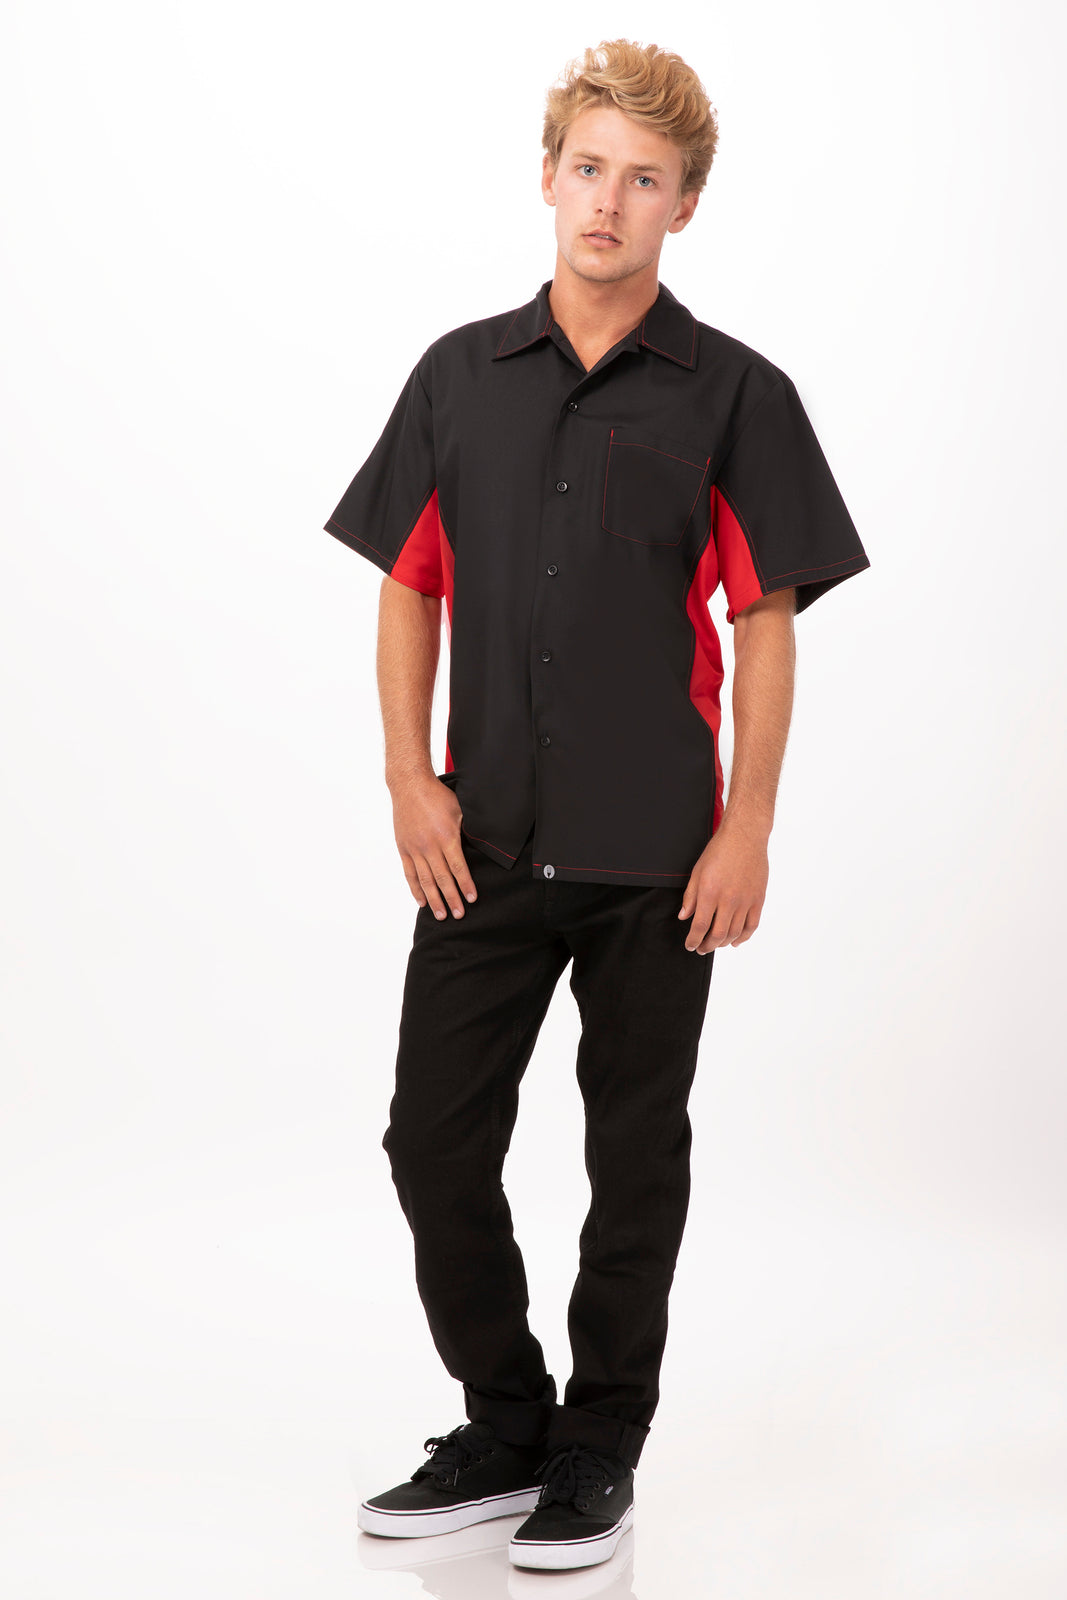 Chef Works - Universal Contrast Shirt